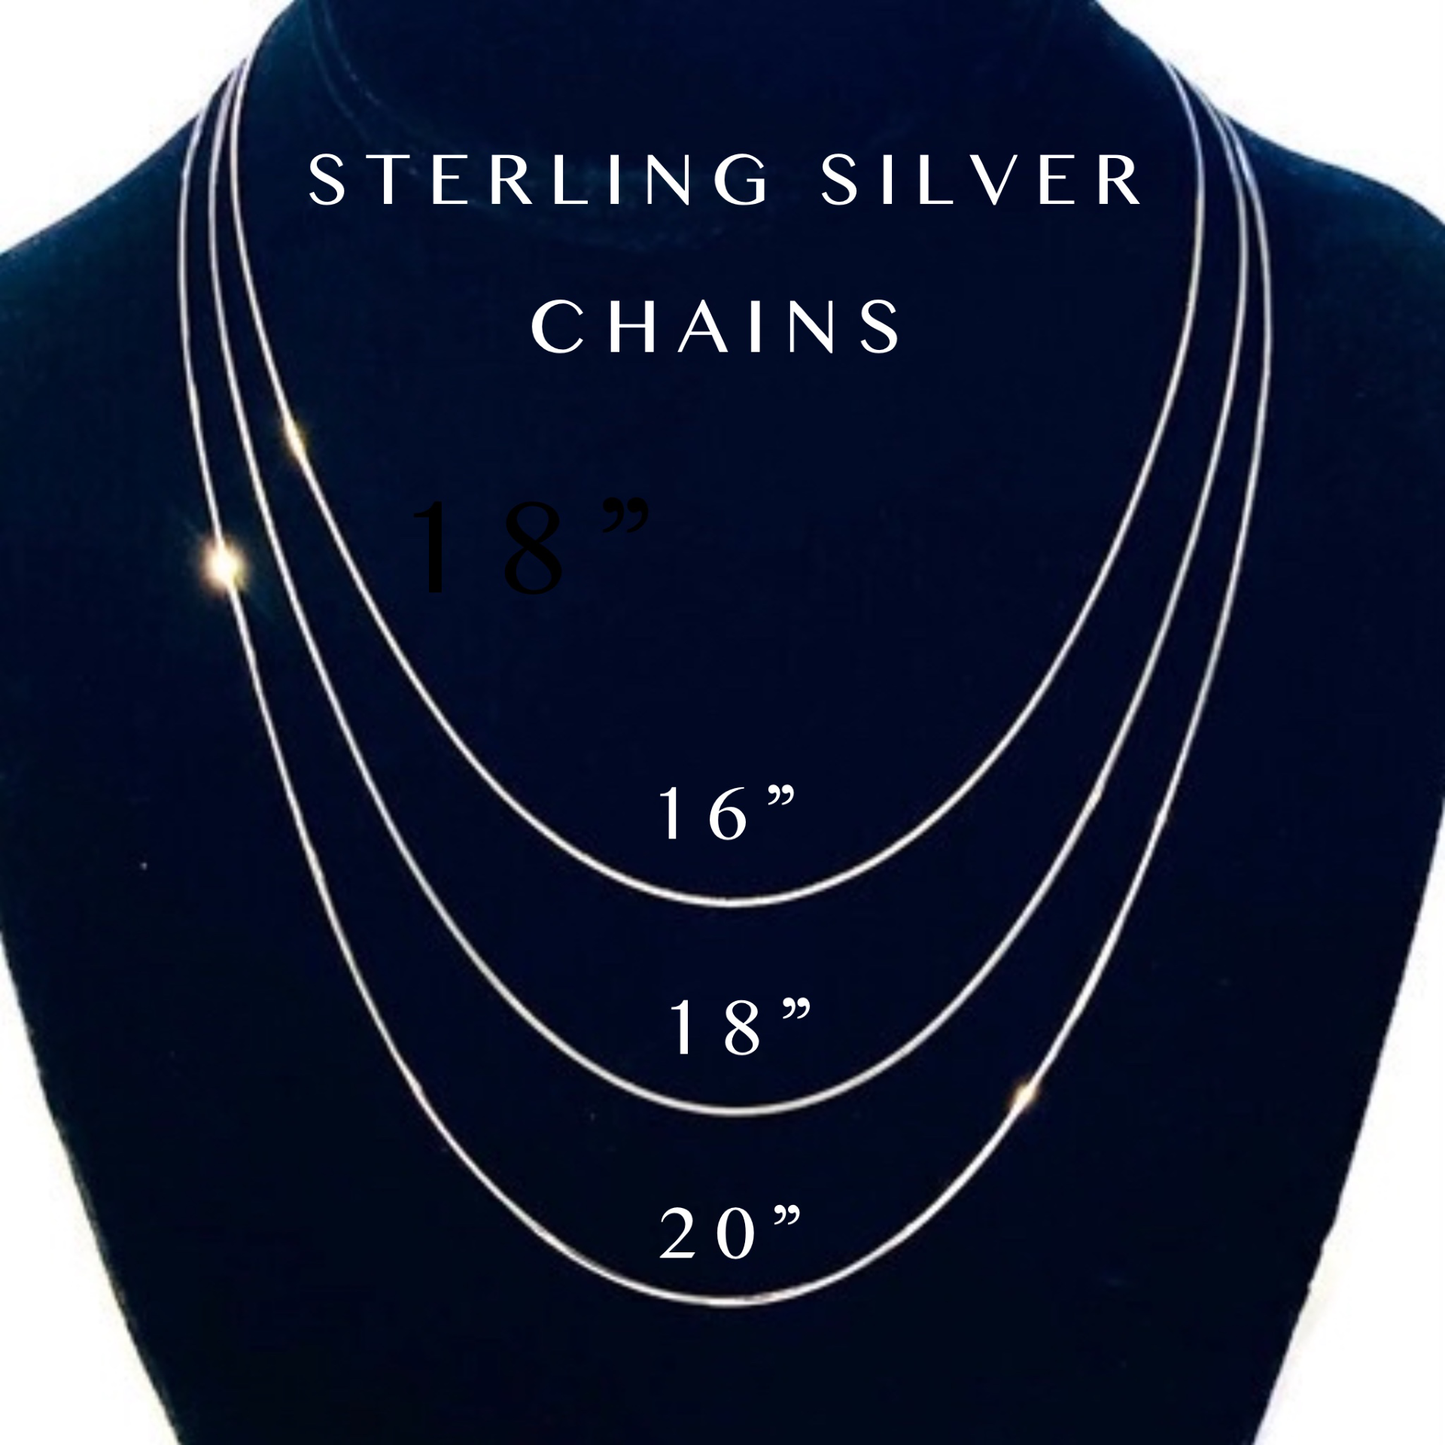 16", 18" & 20" Sterling Chains